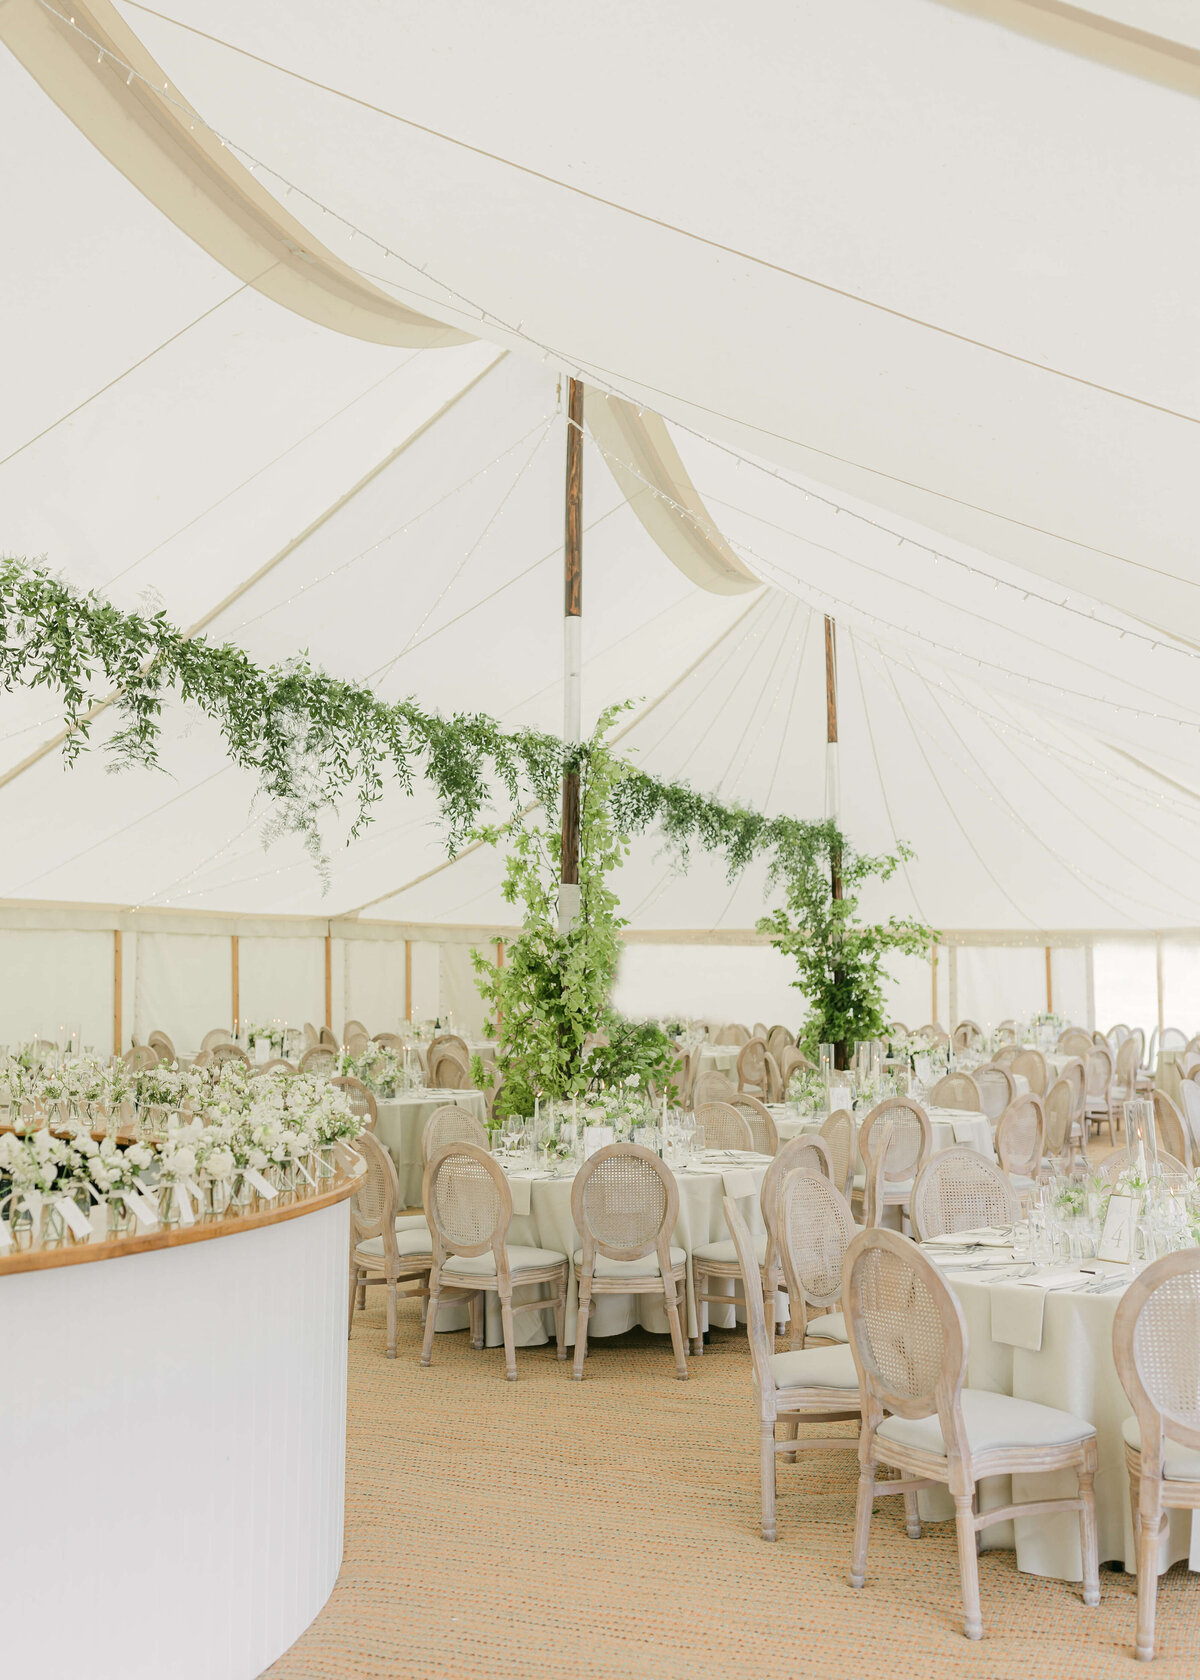 chloe-winstanley-weddings-cotswolds-cornwell-manor-sailcloth-sperry-tent-foliage